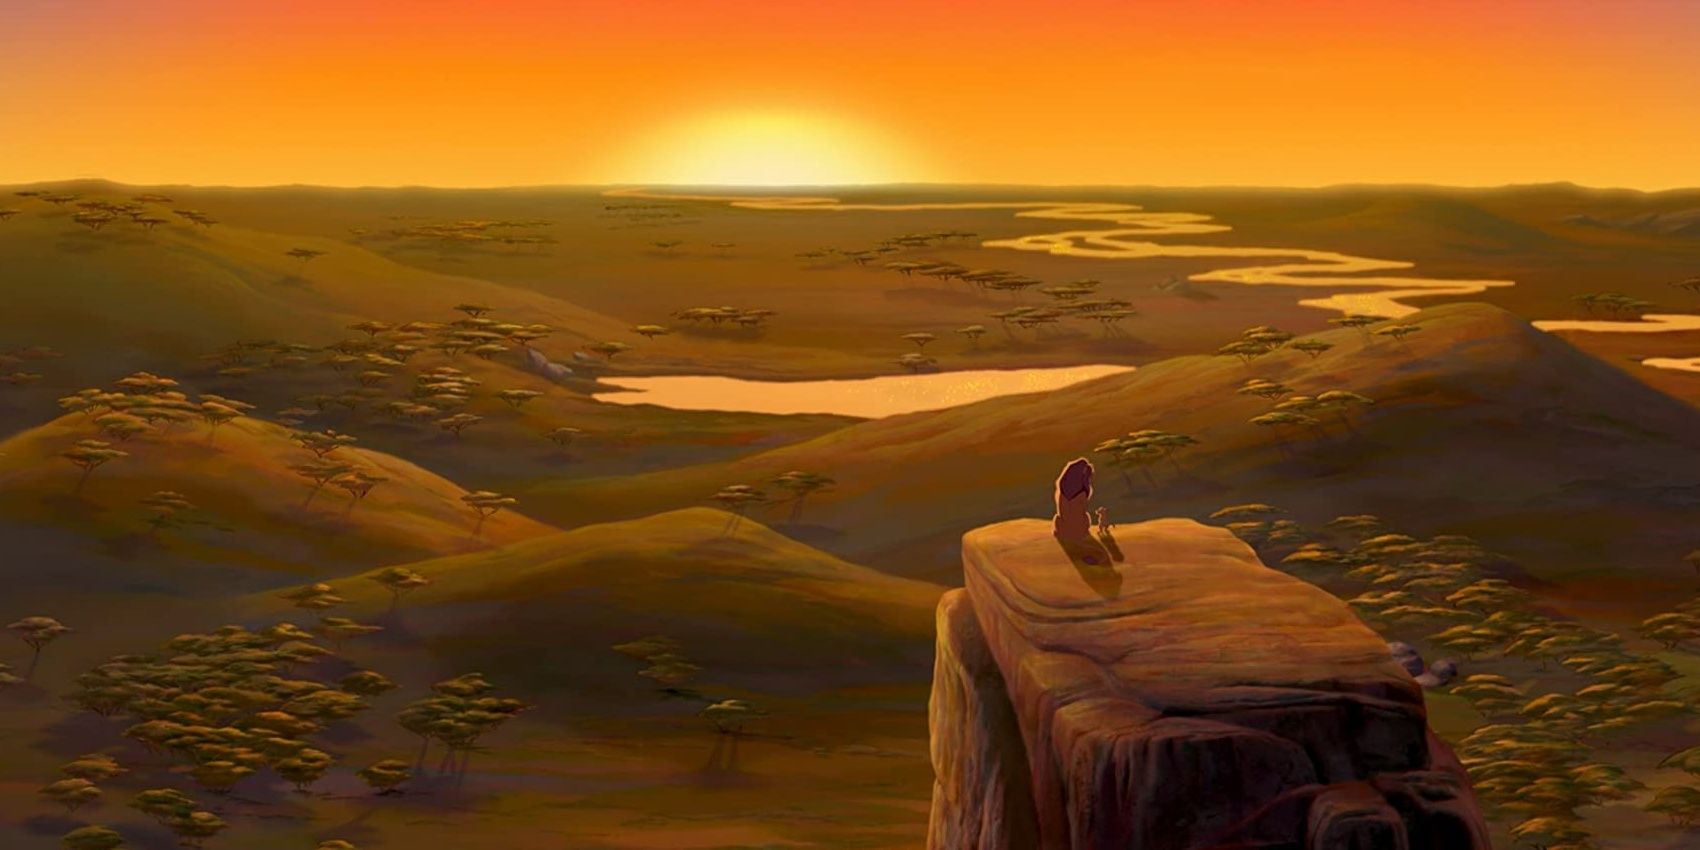 Mufasa and Simba sitting on the edge of a rock during sunrise in The Lion King